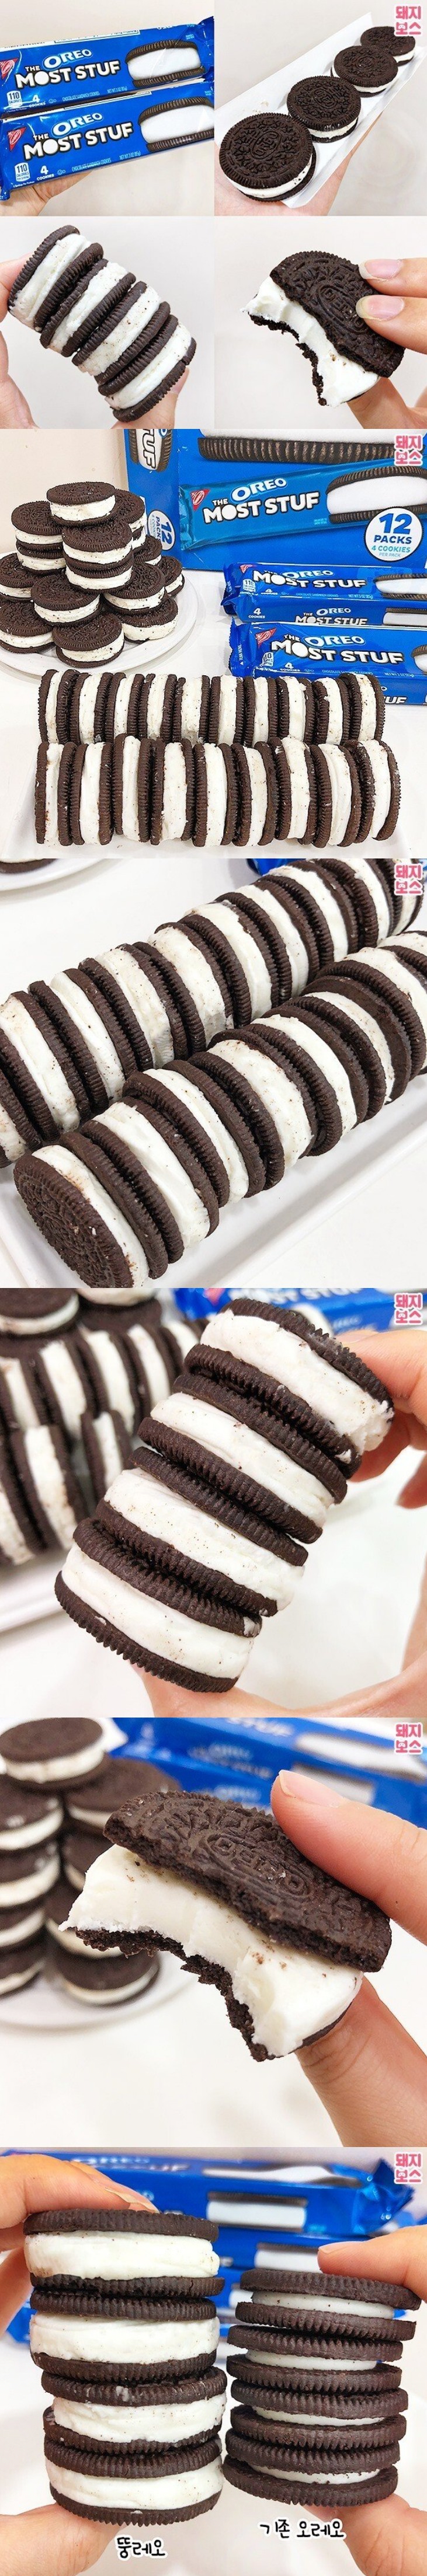 What do you think Oreos are like these days?